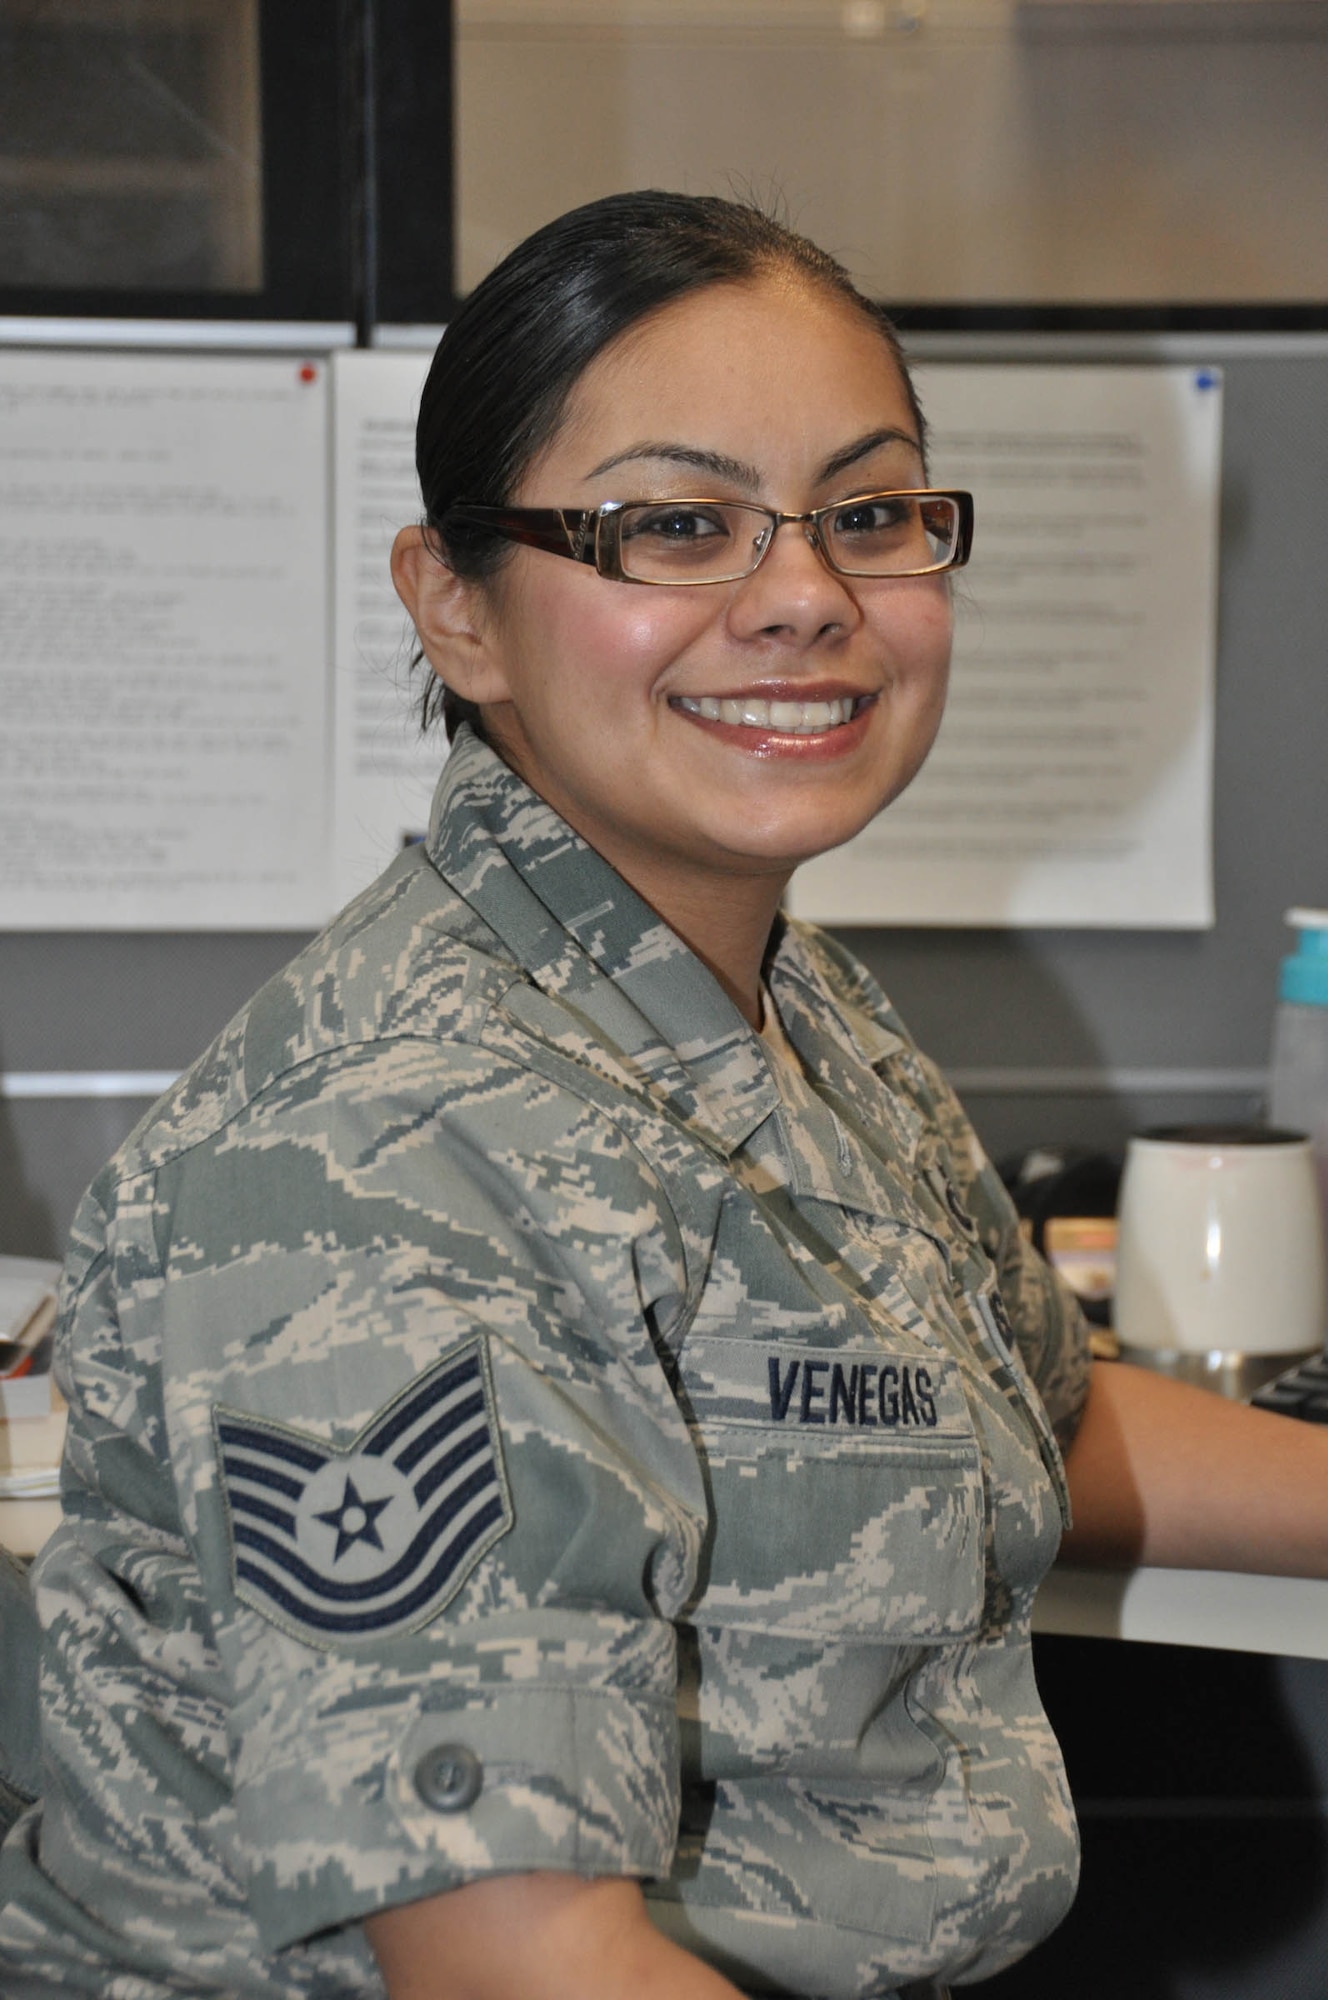 Tech. Sgt. Faviola Venegas is a flight records manager for the 452nd Operational Support Squadron at March Air Reserve Base, Calif. (U.S. Air Force photo/Tech. Sgt. Joe Davidson)